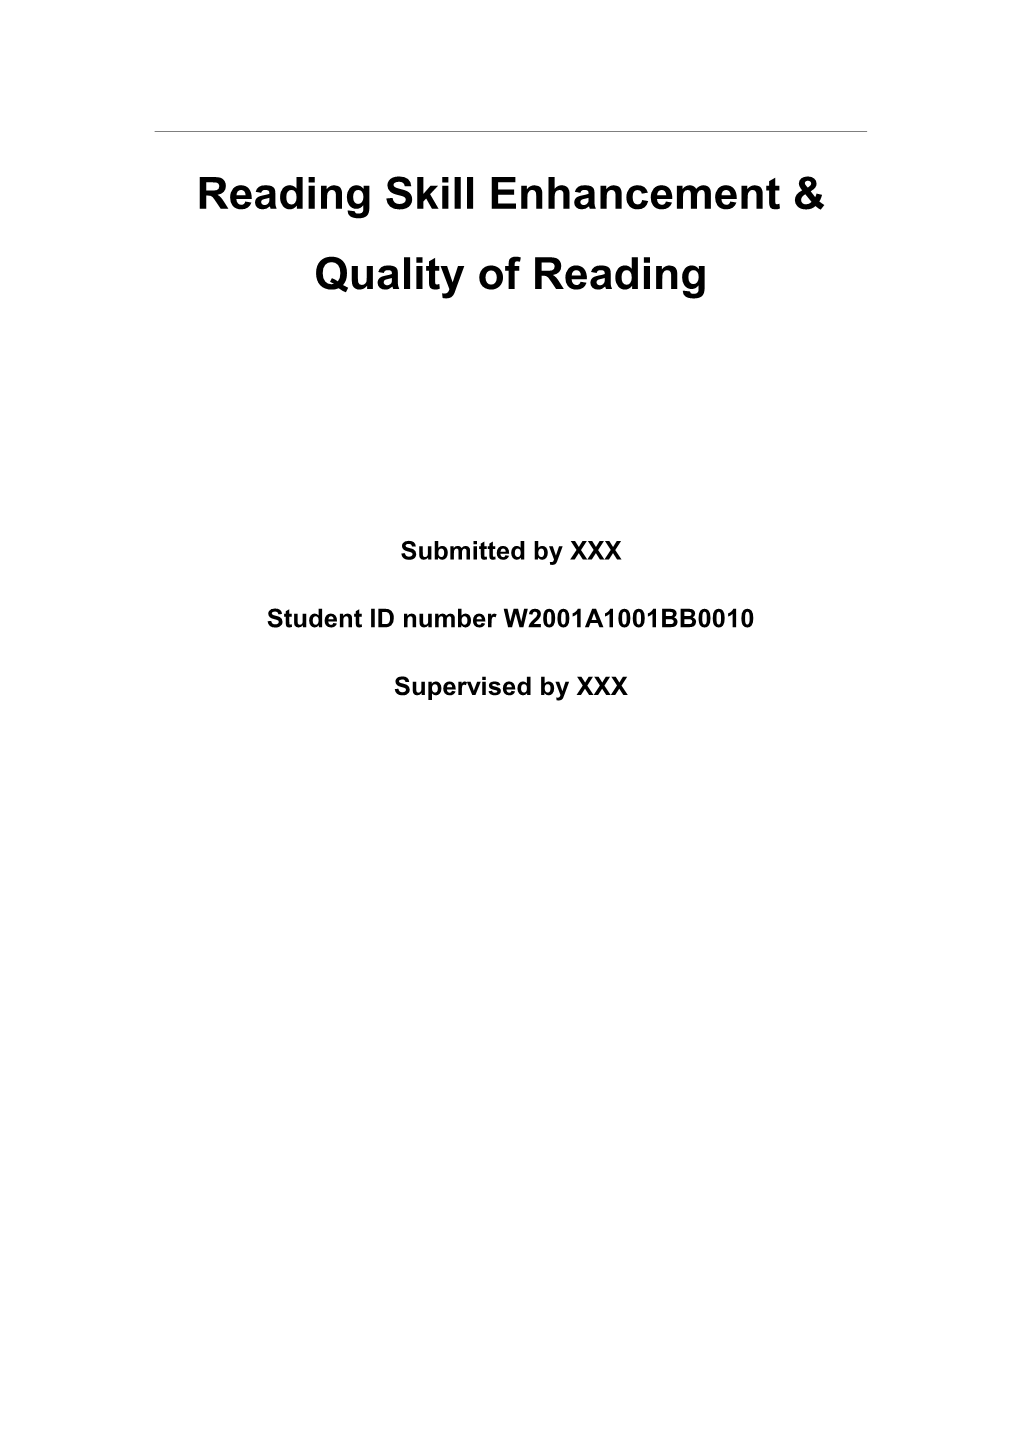 Reading Skill Enhancement & Quality of Reading